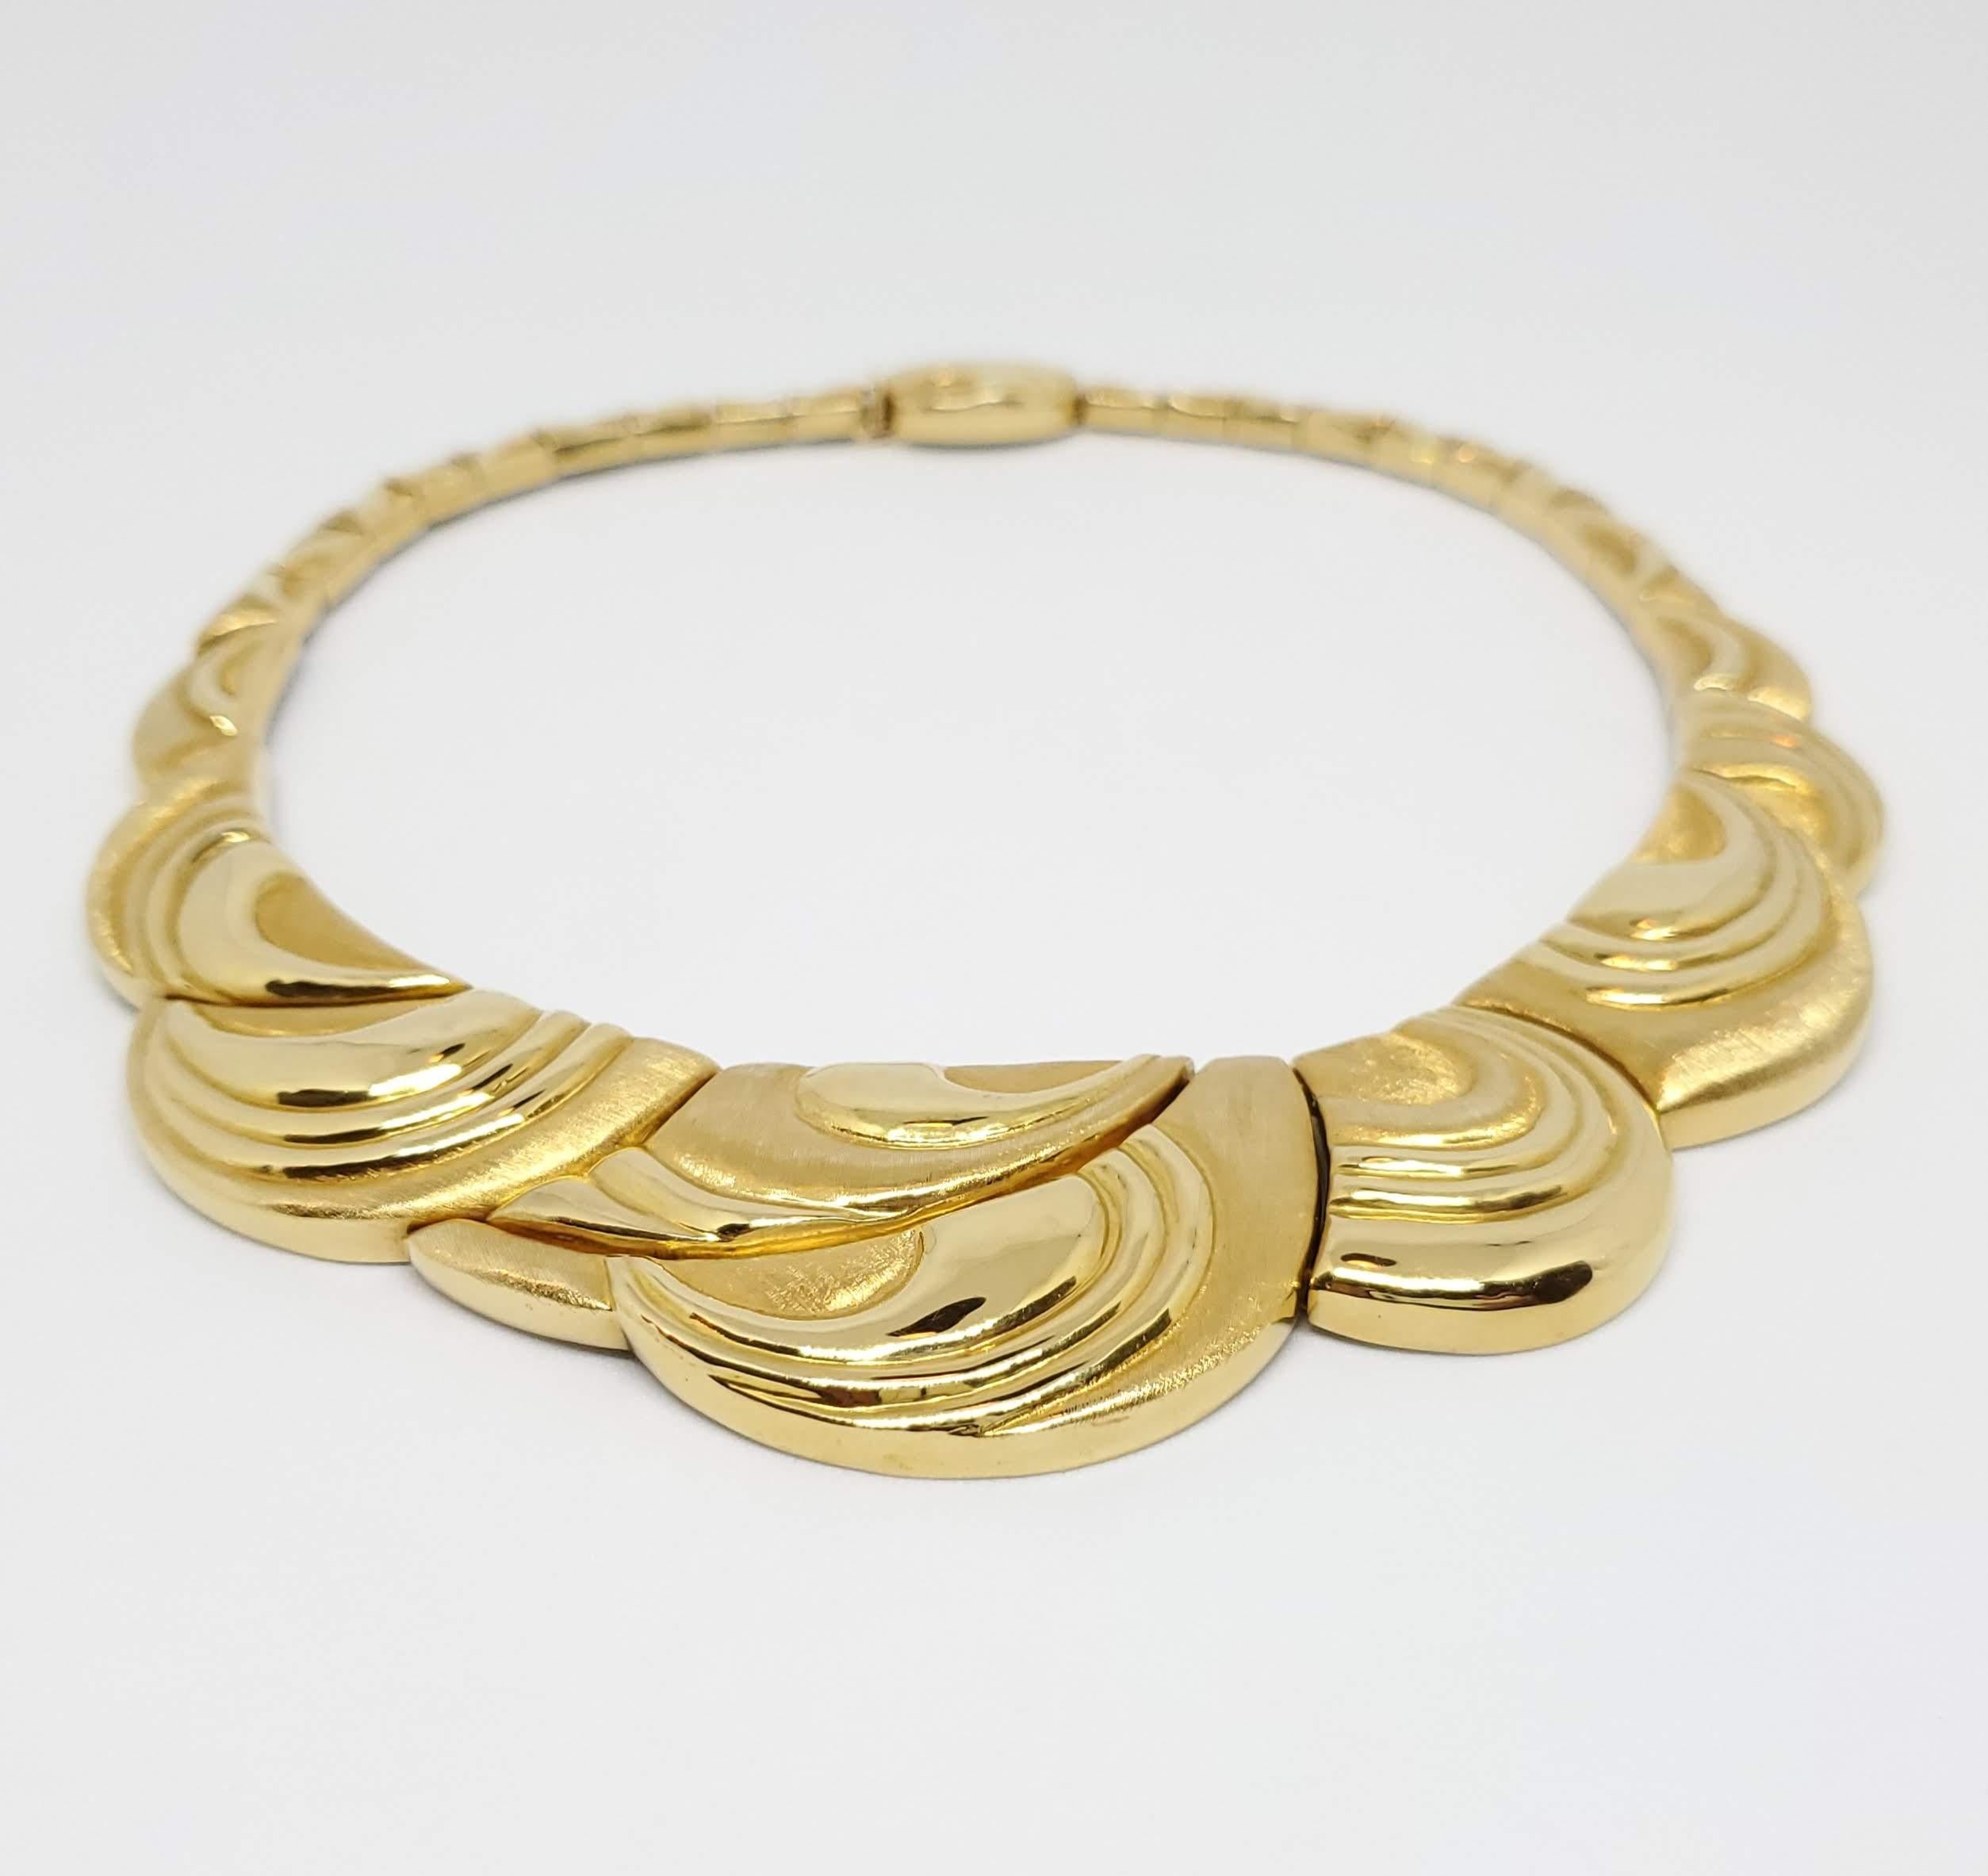 Thanks for taking a look at this Burle Marx 18 Karat Gold Necklace. This necklace has 104 grams of gold, and a matching bracelet (Sold Seperately) is available. It is 15